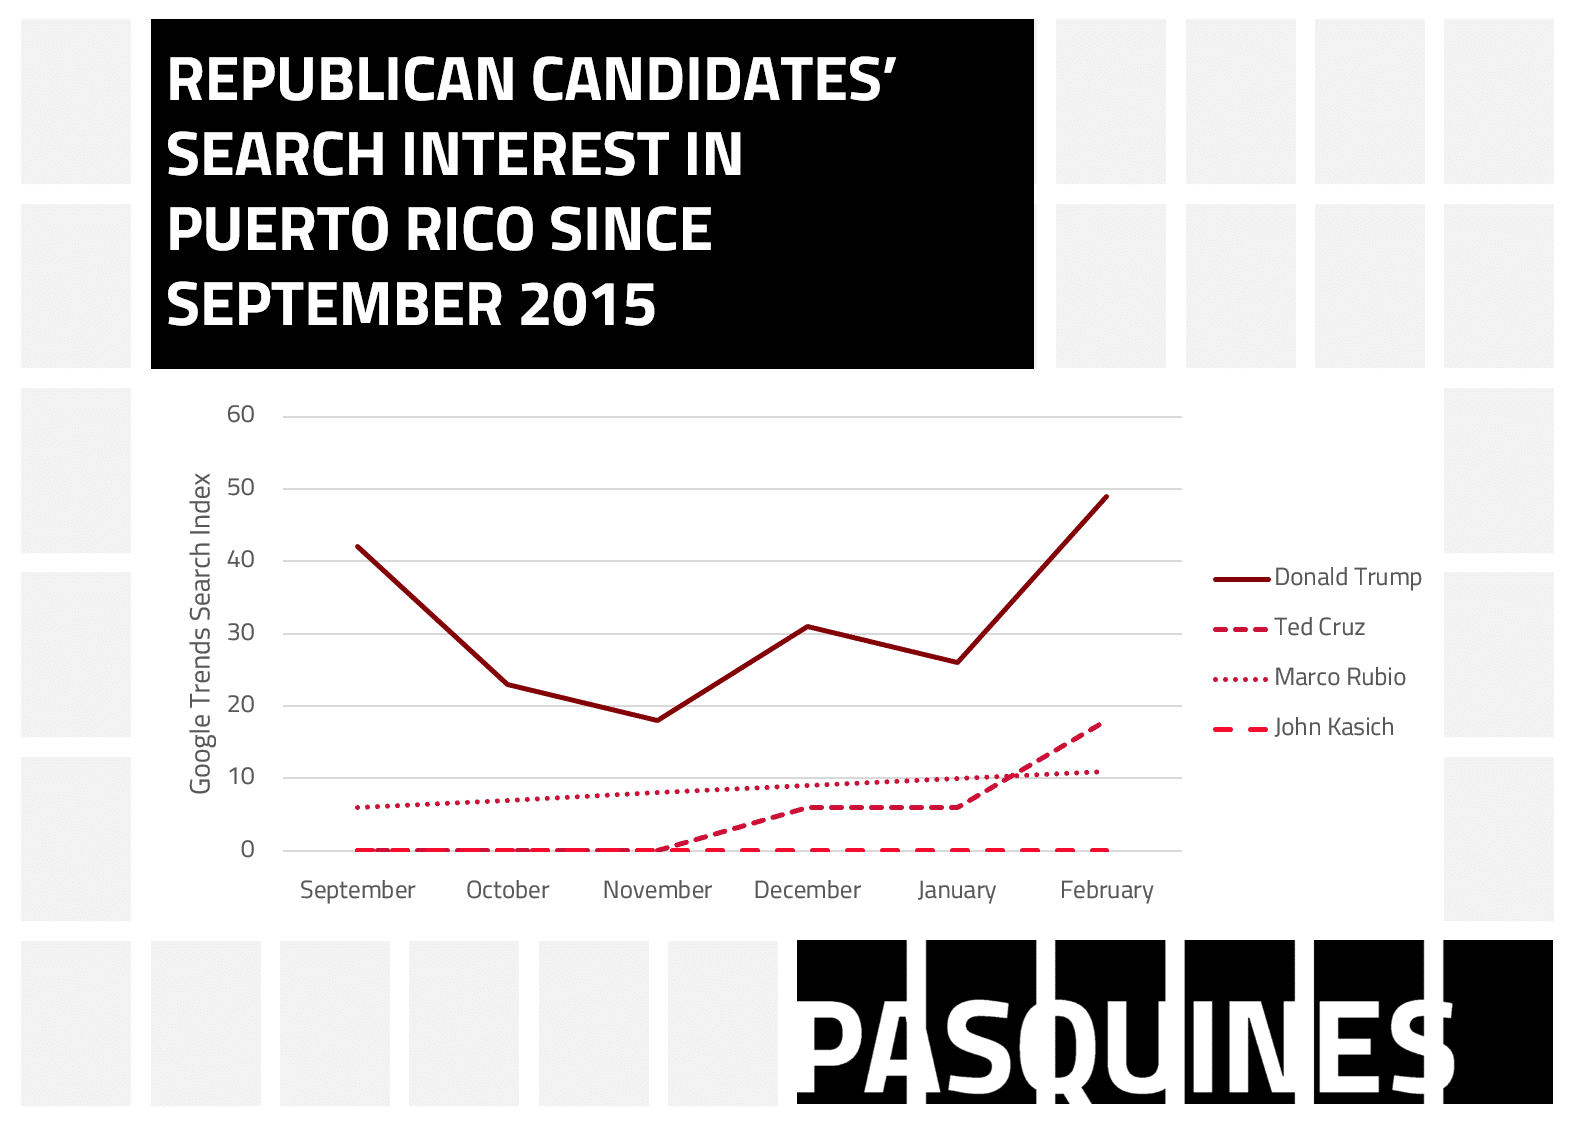 The GOP presidential candidates Puerto Ricans are searching online for the most